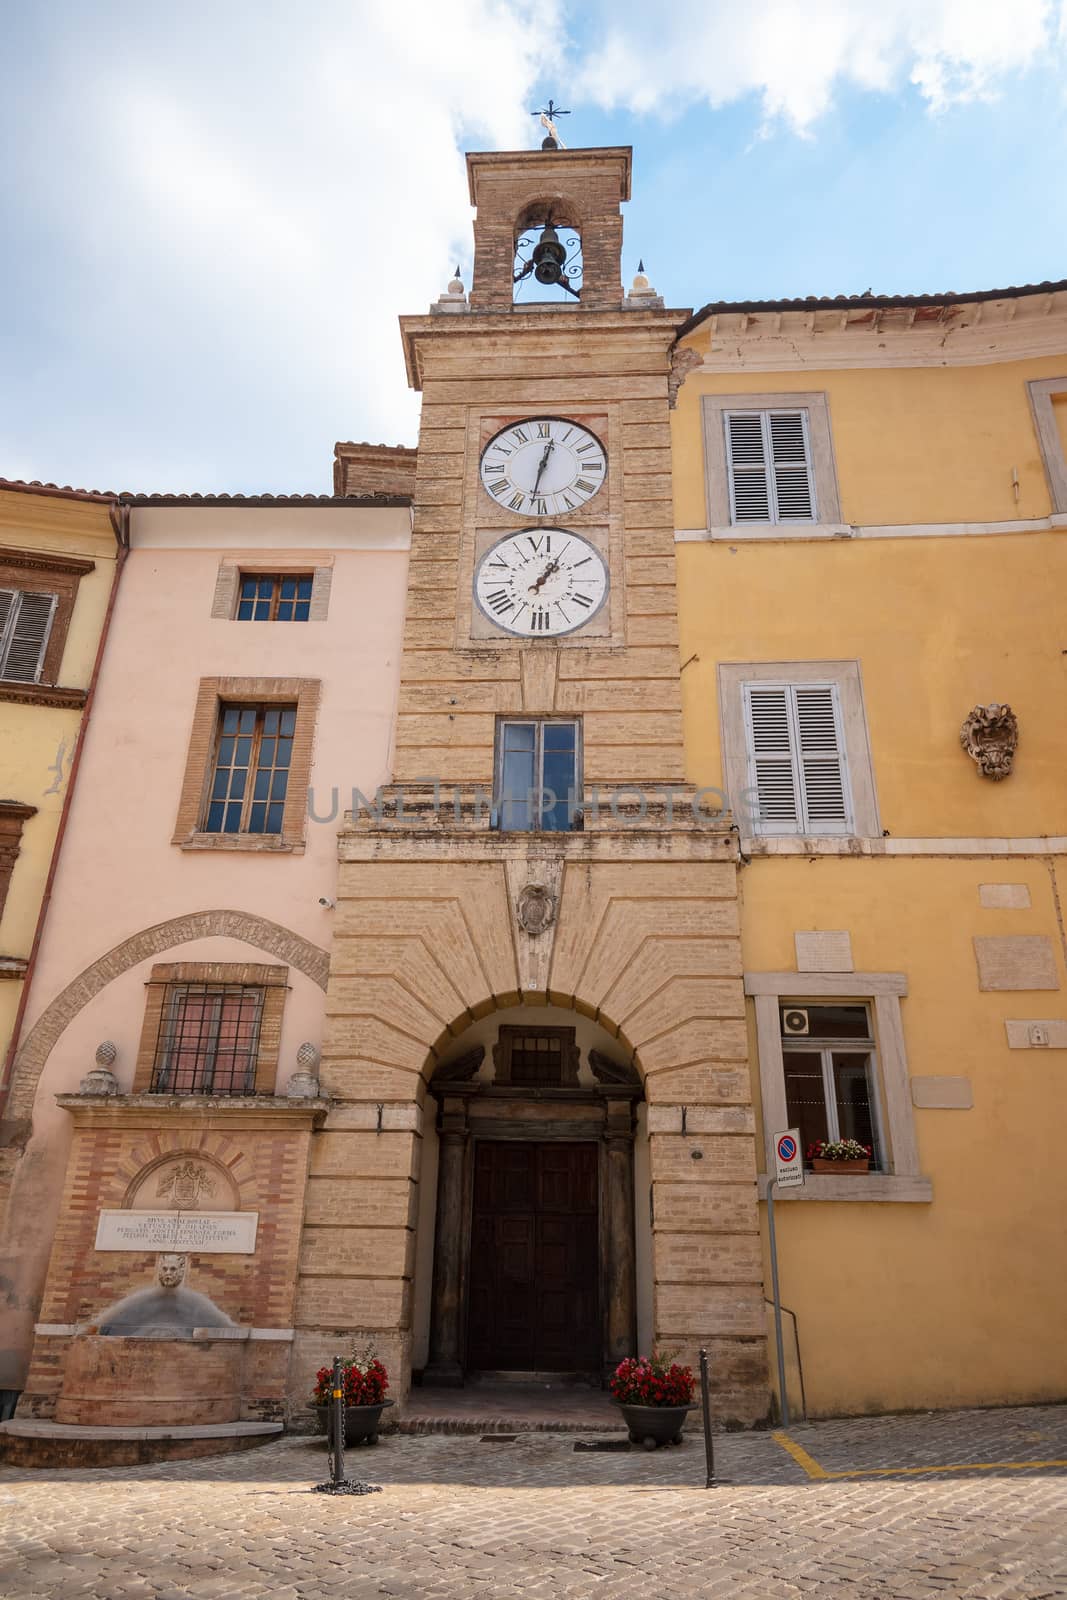 clock tower at San Severino Marche Italy by magann